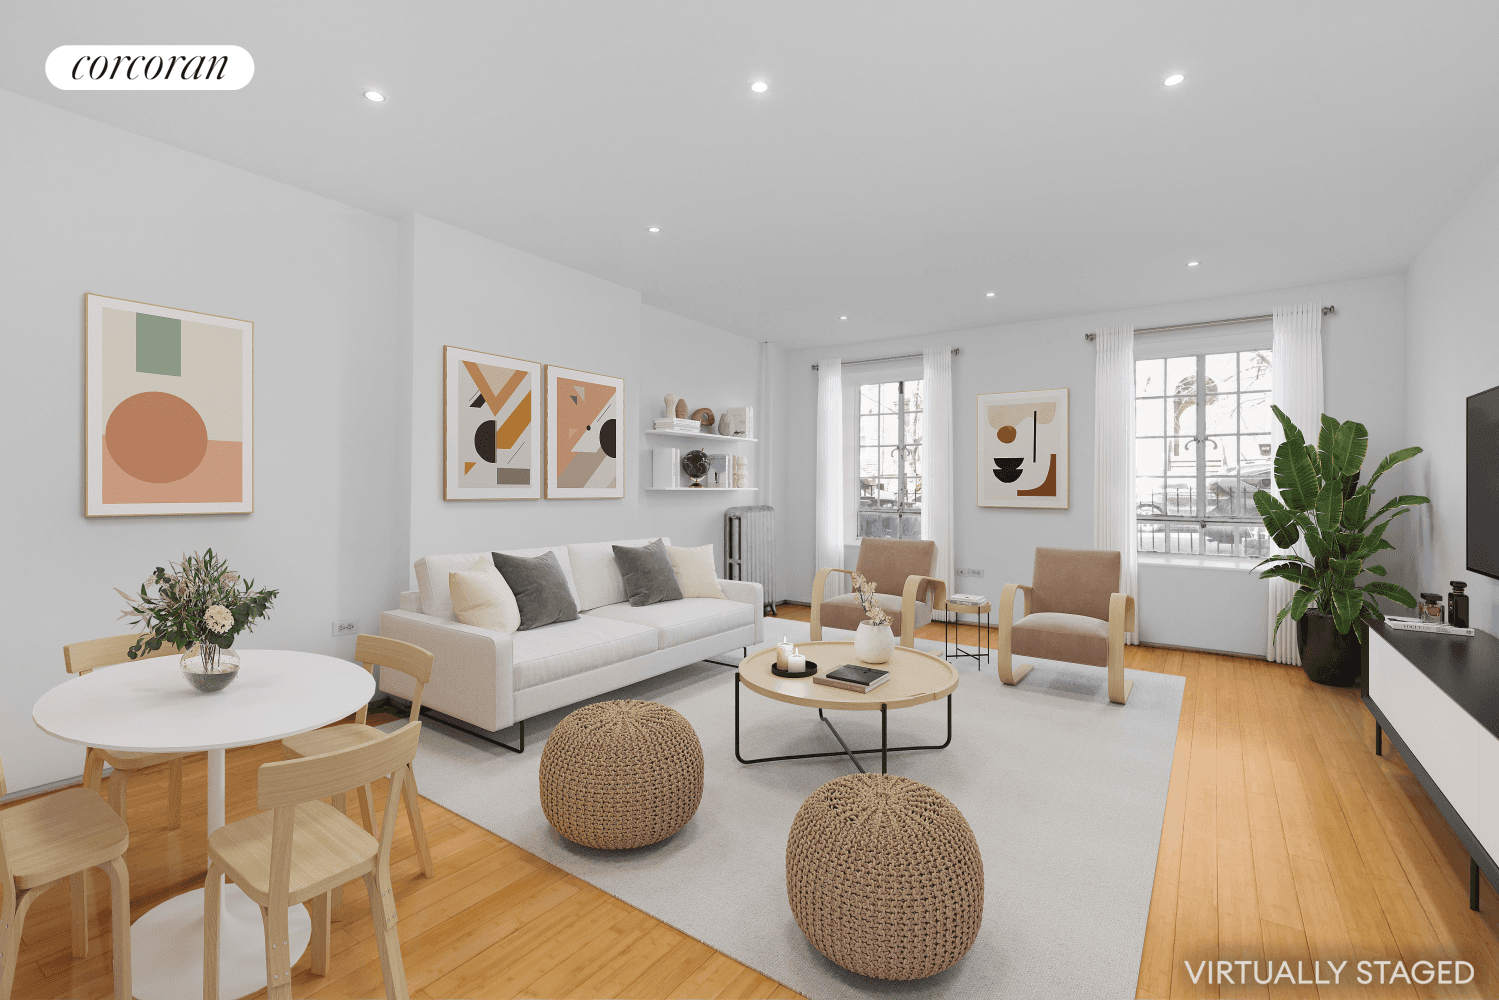 Welcome to 102 Kent Street 1, a lovely 1 bedroom, 1 bathroom apartment, with a home office flex bedroom located in the heart of Greenpoint, Brooklyn.